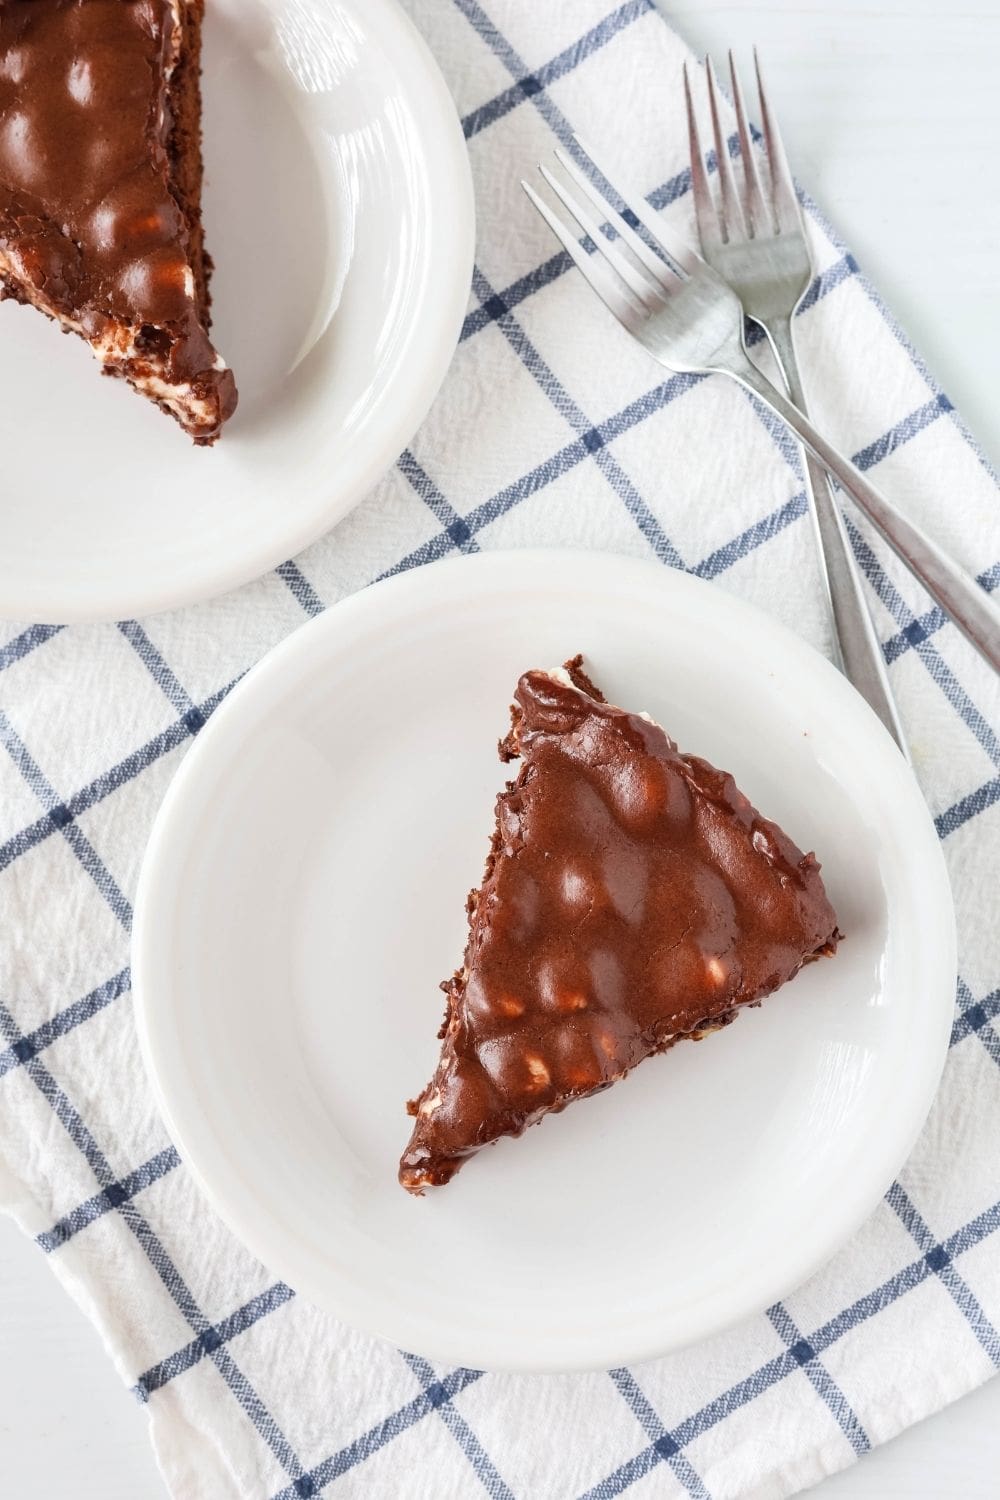 overhead view of two slices of Appalachian brownie pie, each served on a white plate, with forks next to the plates.